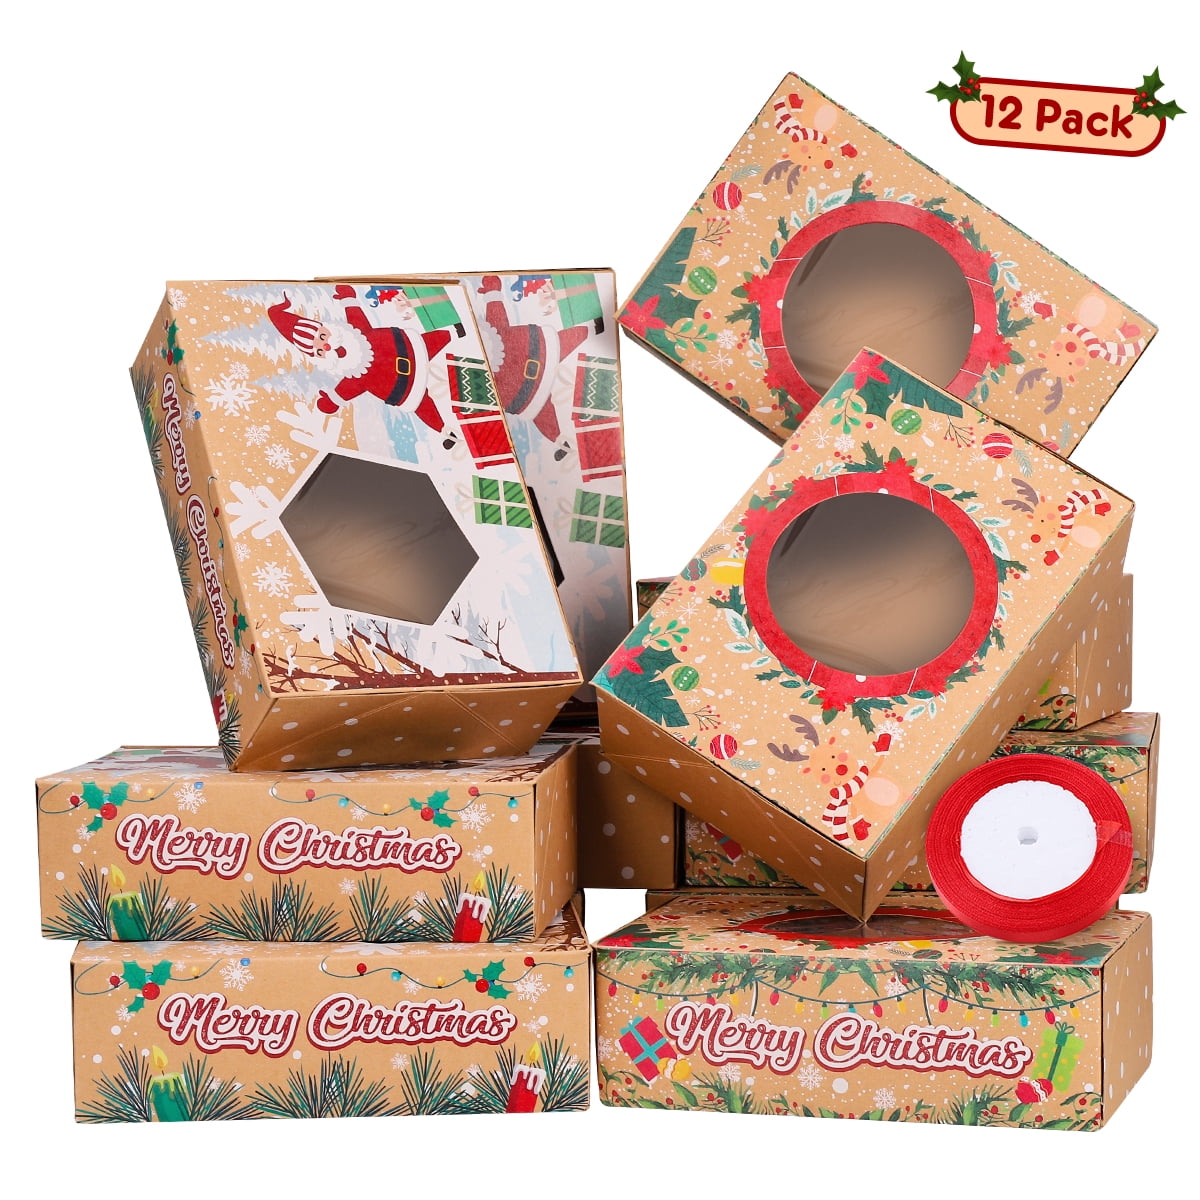 Cabilock 12pcs Christmas Cookie Boxes Doughnut and Cookie Gift Boxes with Clear Window and 22m Ribbons,Candy and Cookie Boxes for Gift Giving